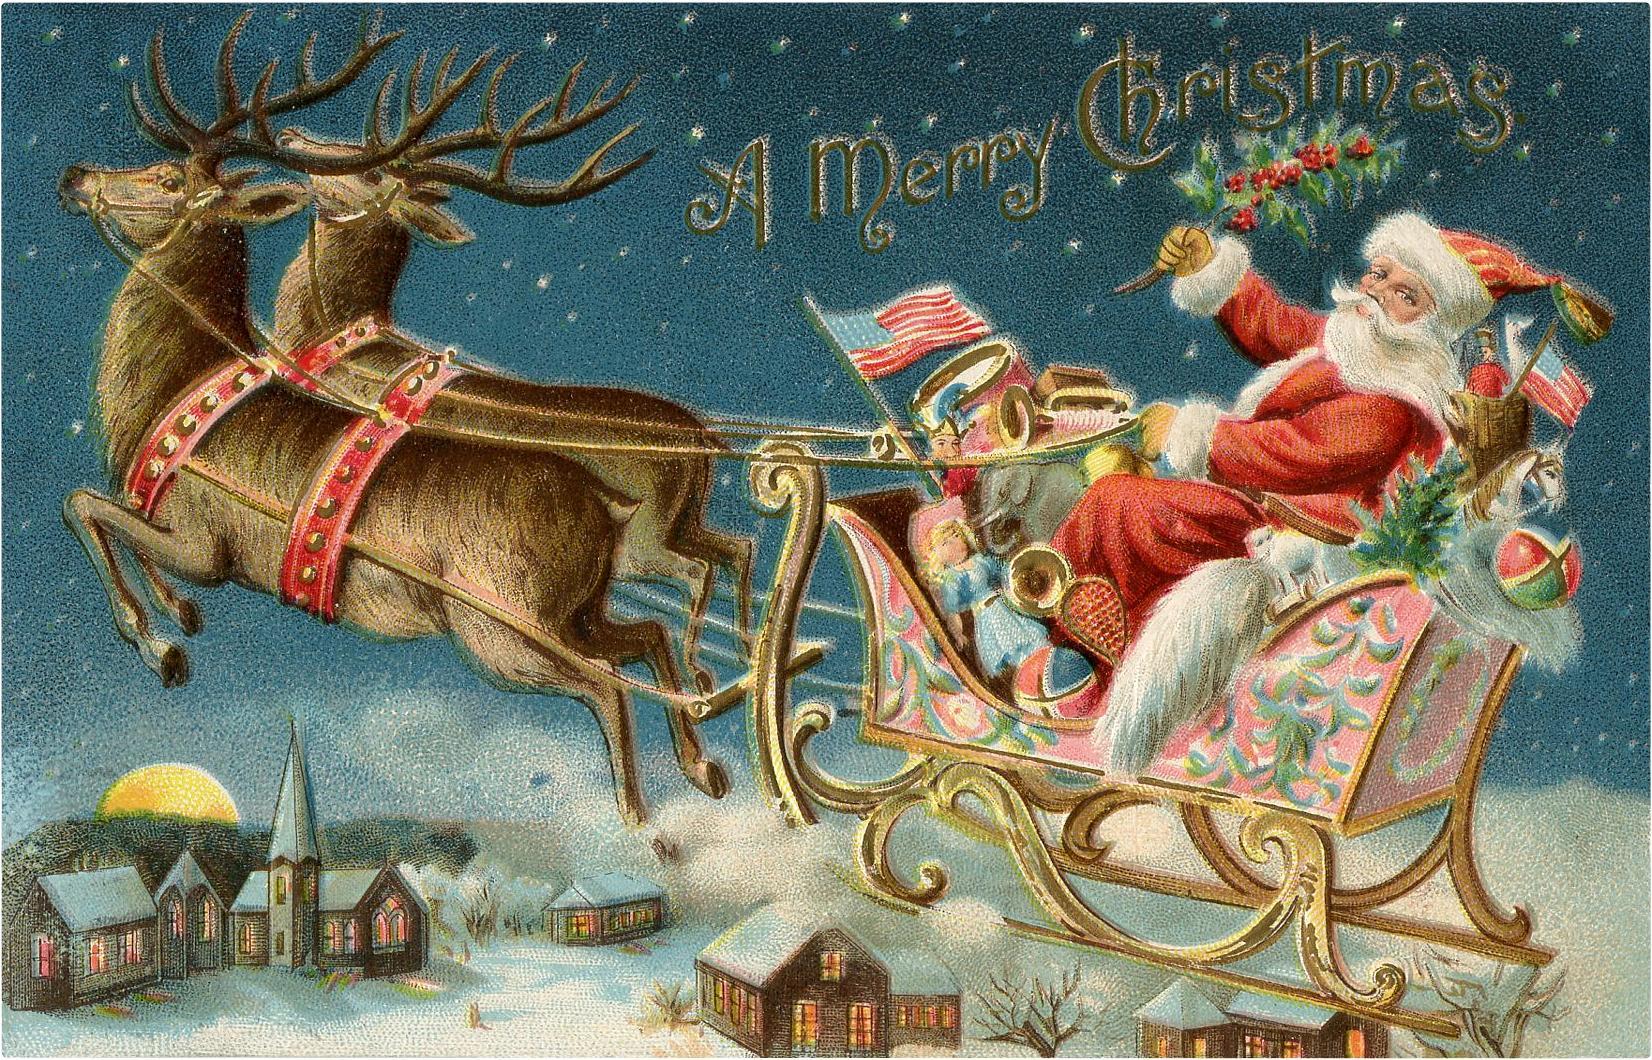 Santa Sleigh Image and More! Graphics Fairy